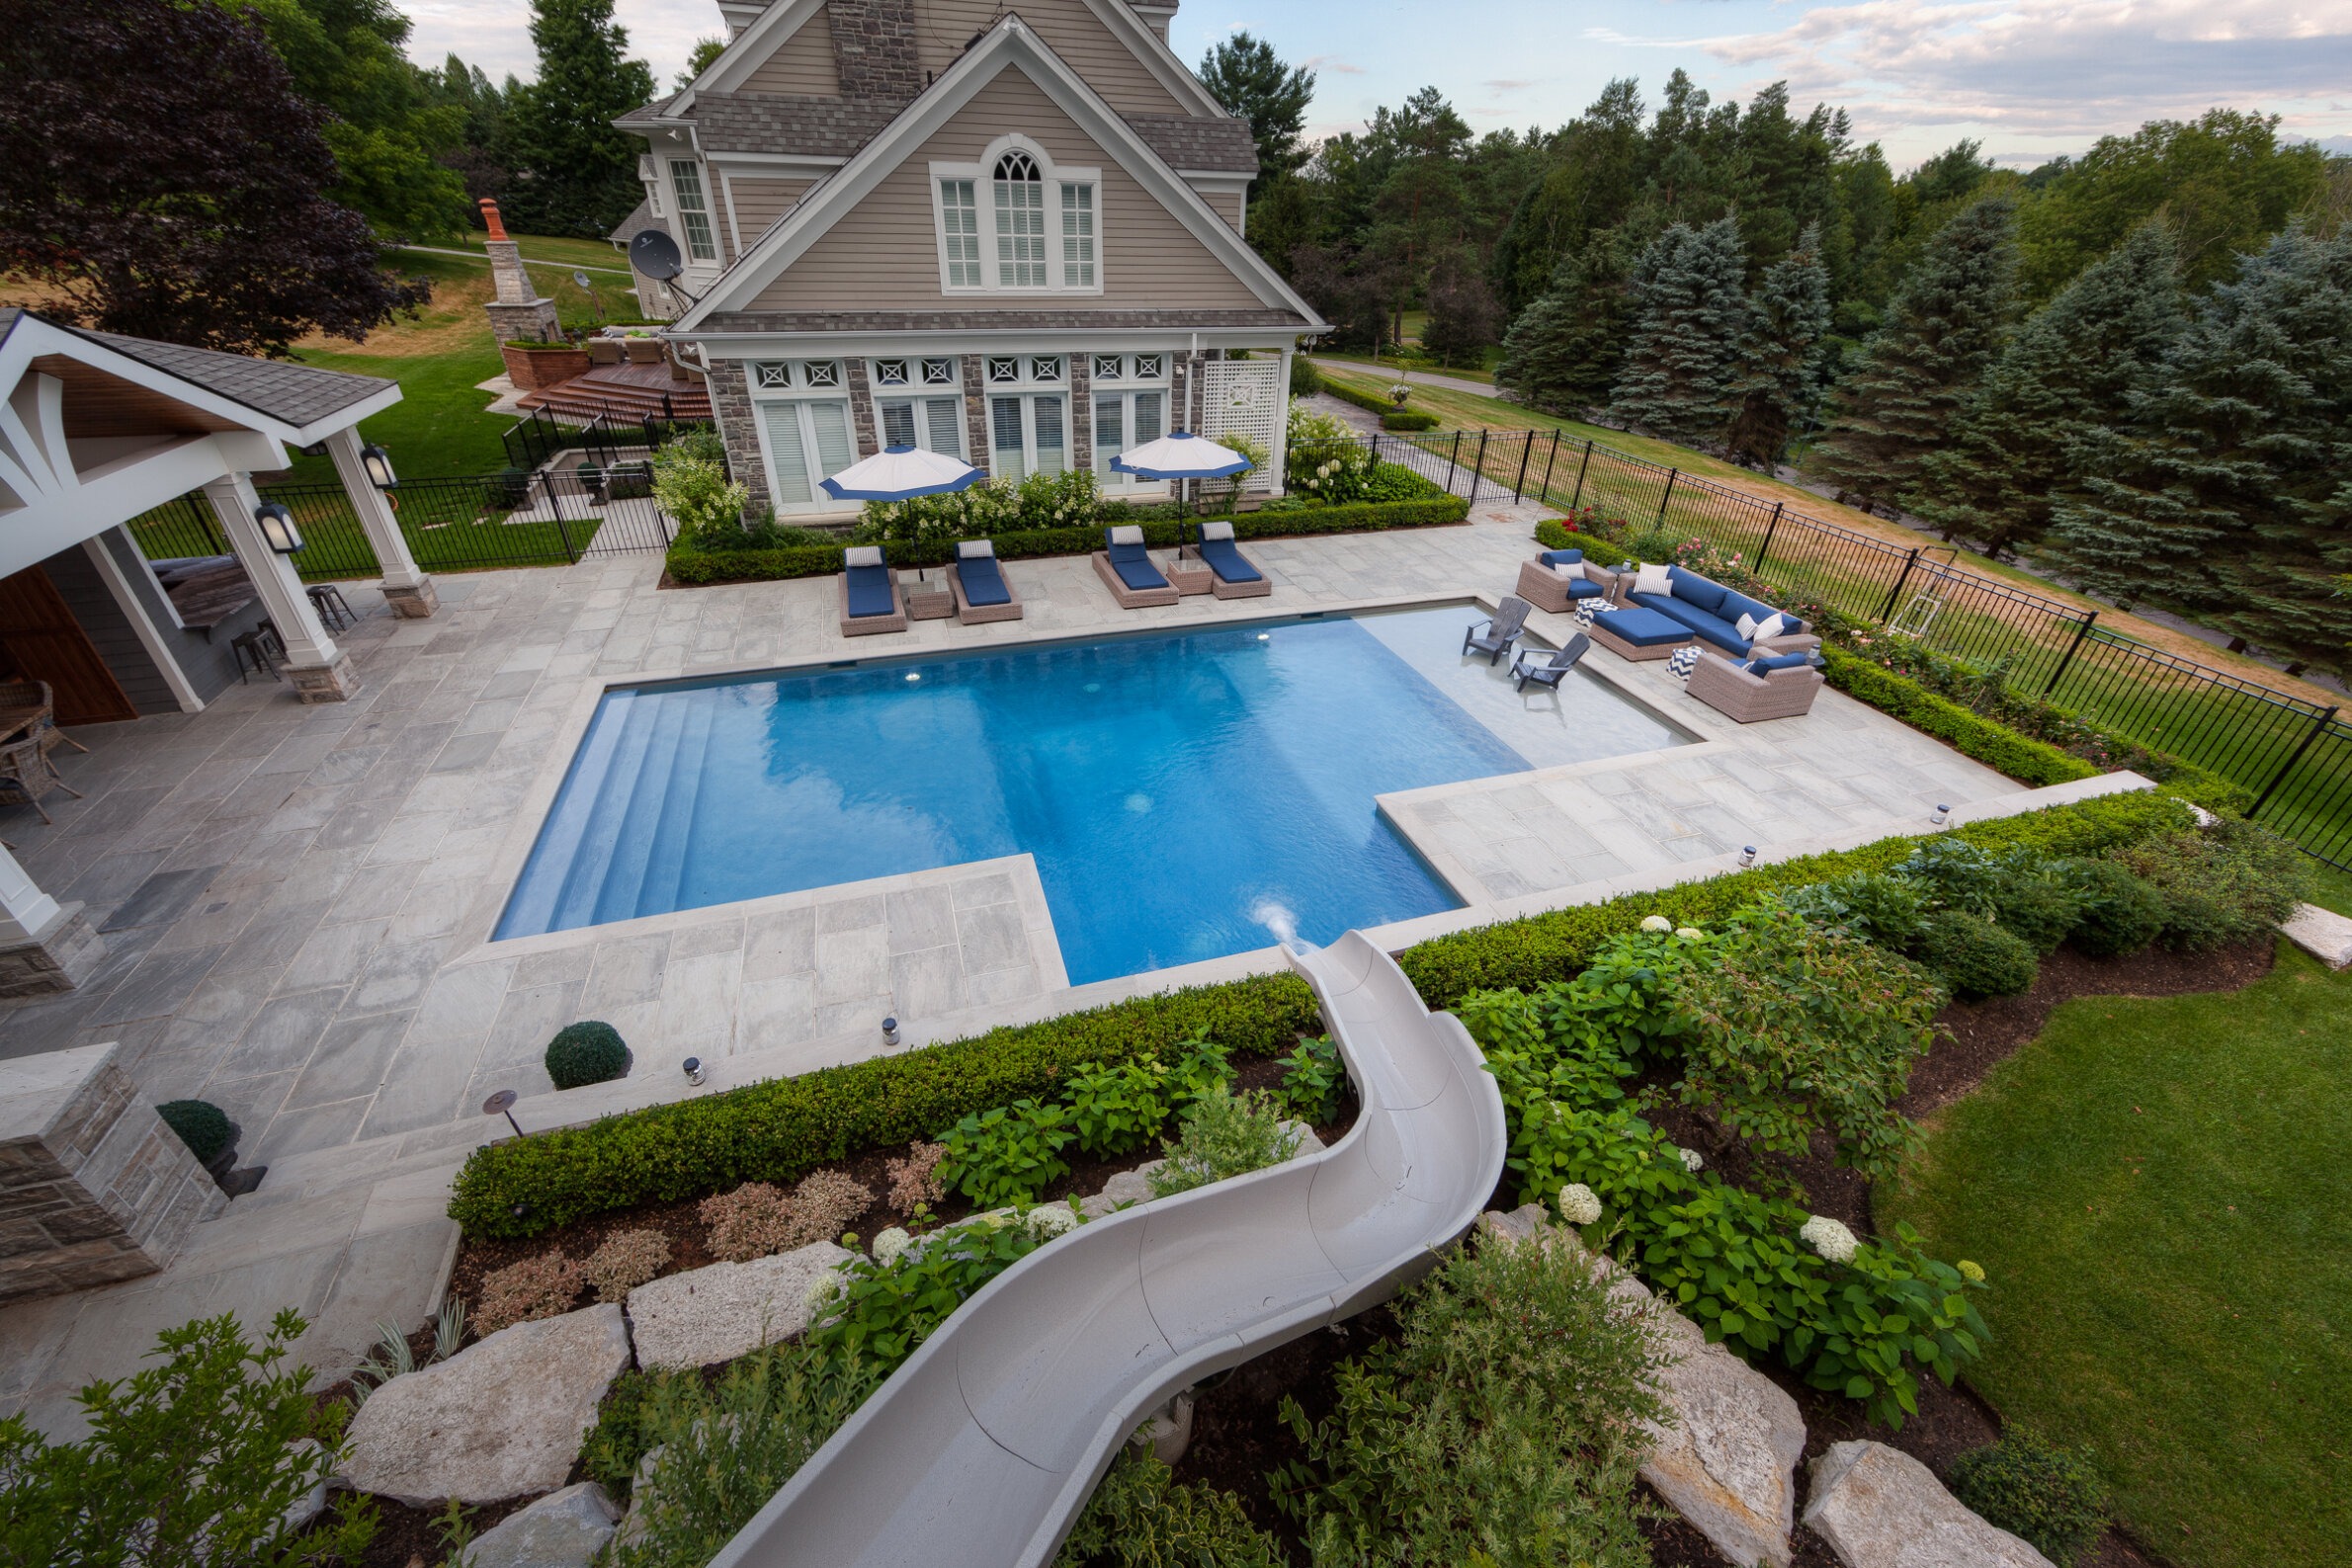 This image shows a luxurious backyard with a swimming pool, lounge chairs, a slide, landscaping, a gazebo, and a large house, all enclosed by a fence.